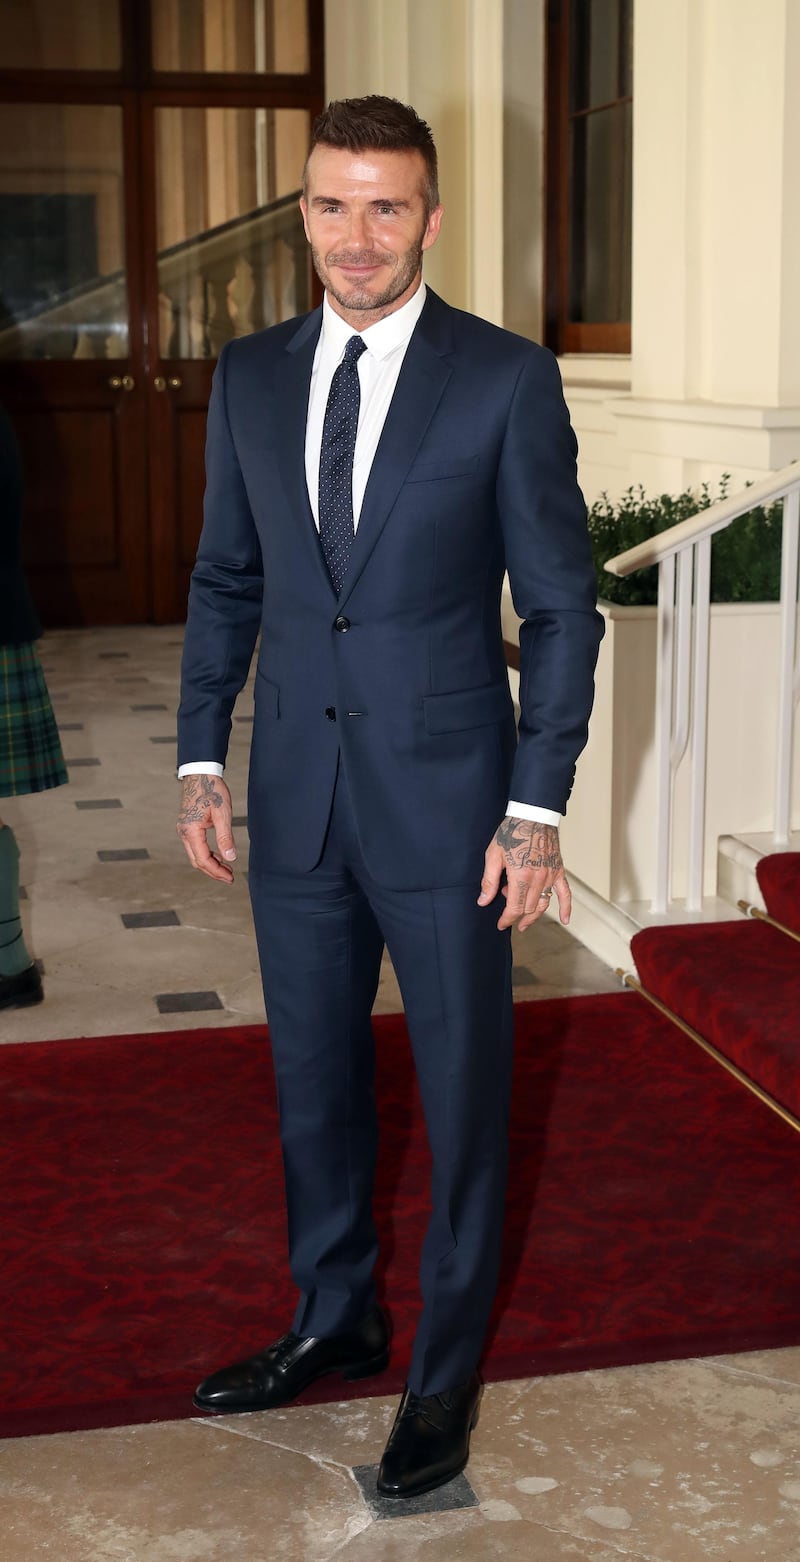 LONDON, ENGLAND - JUNE 26: David Beckham attends the Queen's Young Leaders Award Ceremony as Queen Elizabeth II accompanied by Prince Harry, Duke of Sussex and Meghan, Duchess of Sussex host a reception at Buckingham Palace to present awards to the Queen's Young Leaders for 2018 at Buckingham Palace on June 26, 2018 in London, England. Among the guests at the reception are the Chairman of The Queen Elizabeth Diamond Jubilee Trust, Sir John Major, Sir Lenny Henry, David Beckham, Nicola Adams, Casper Lee, Neelam Gill, Ore Oduda and Tina Daheley. (Photo by Jon Bond - WPA Pool/Getty Images)